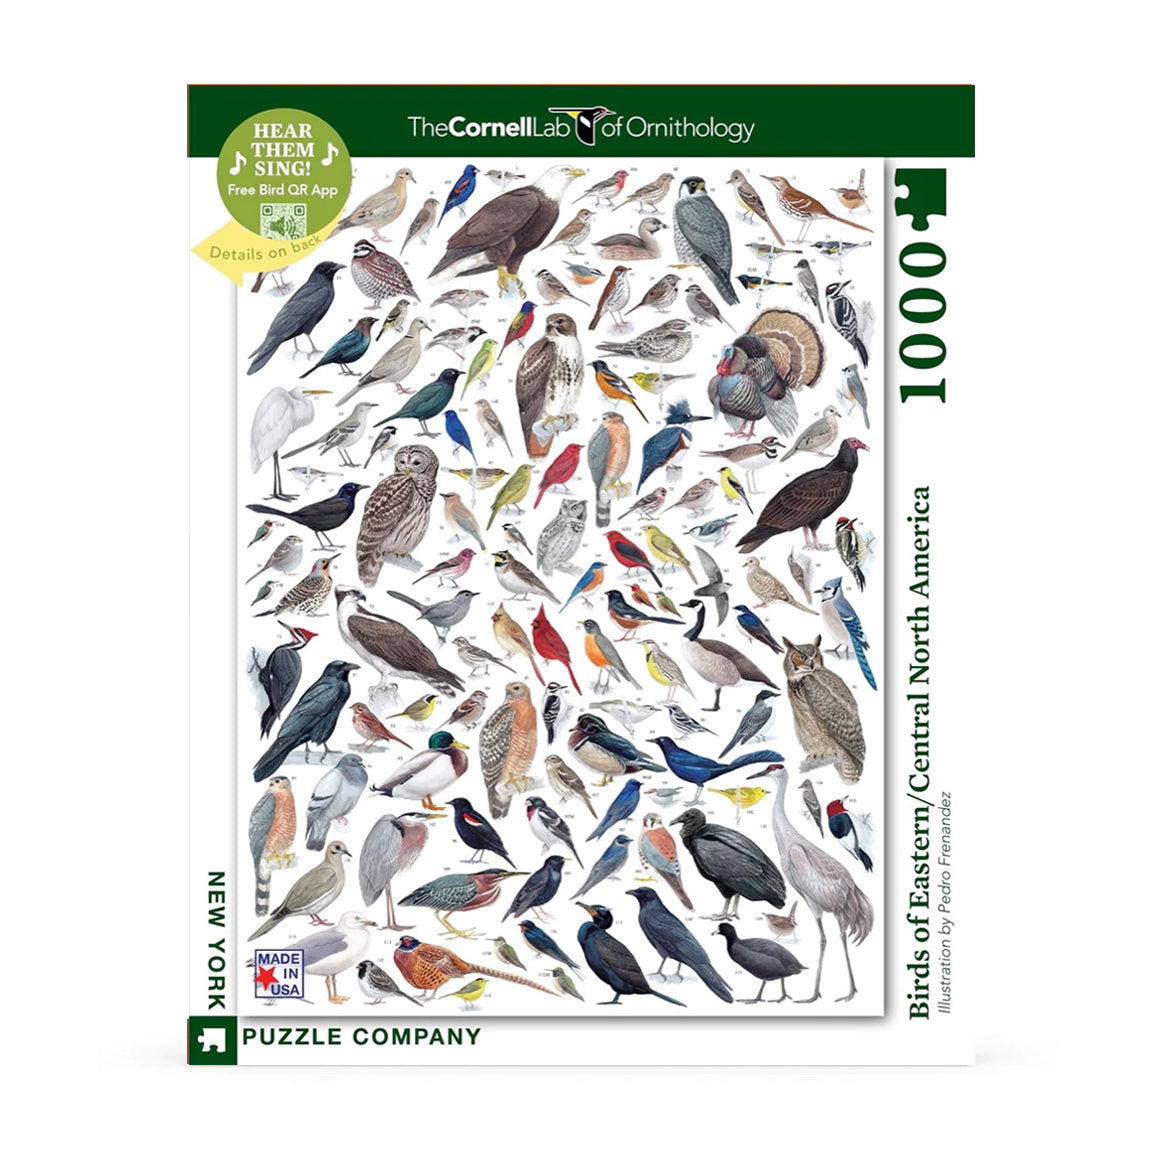 Puzzel The Cornell Lab of Ornitology│Birds of Eastern/Central North America│New York Puzzle Company│1000 pcs│art. NPZCB1836│voorkant recht